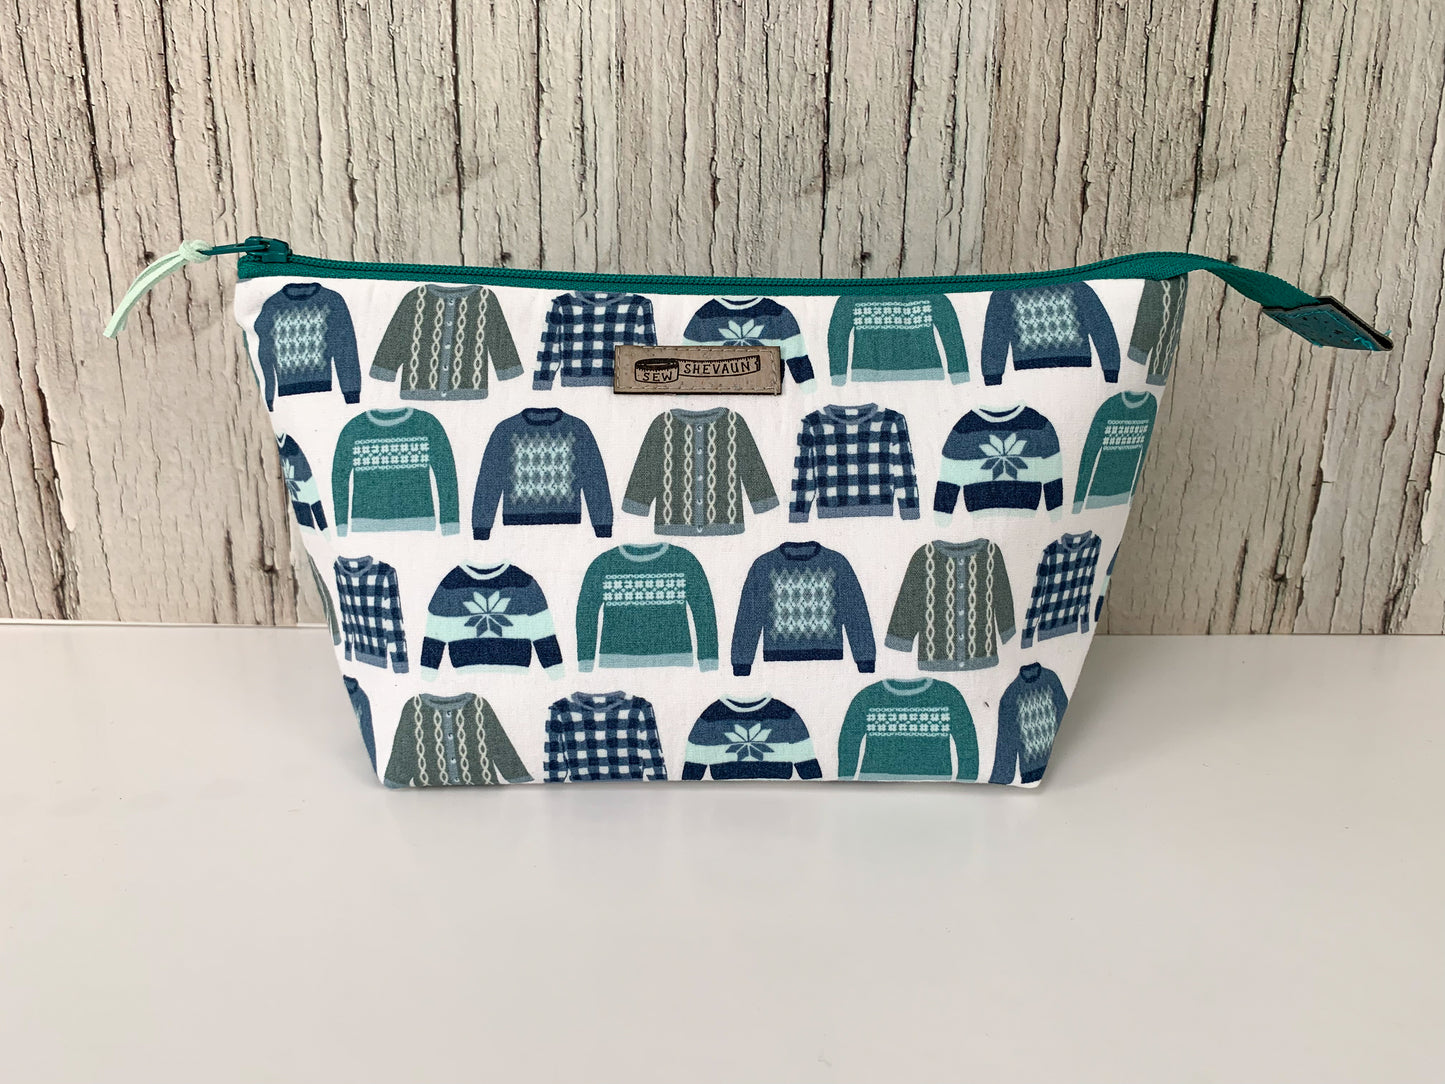 Small Open Wide Zip Pouch - Project Bag